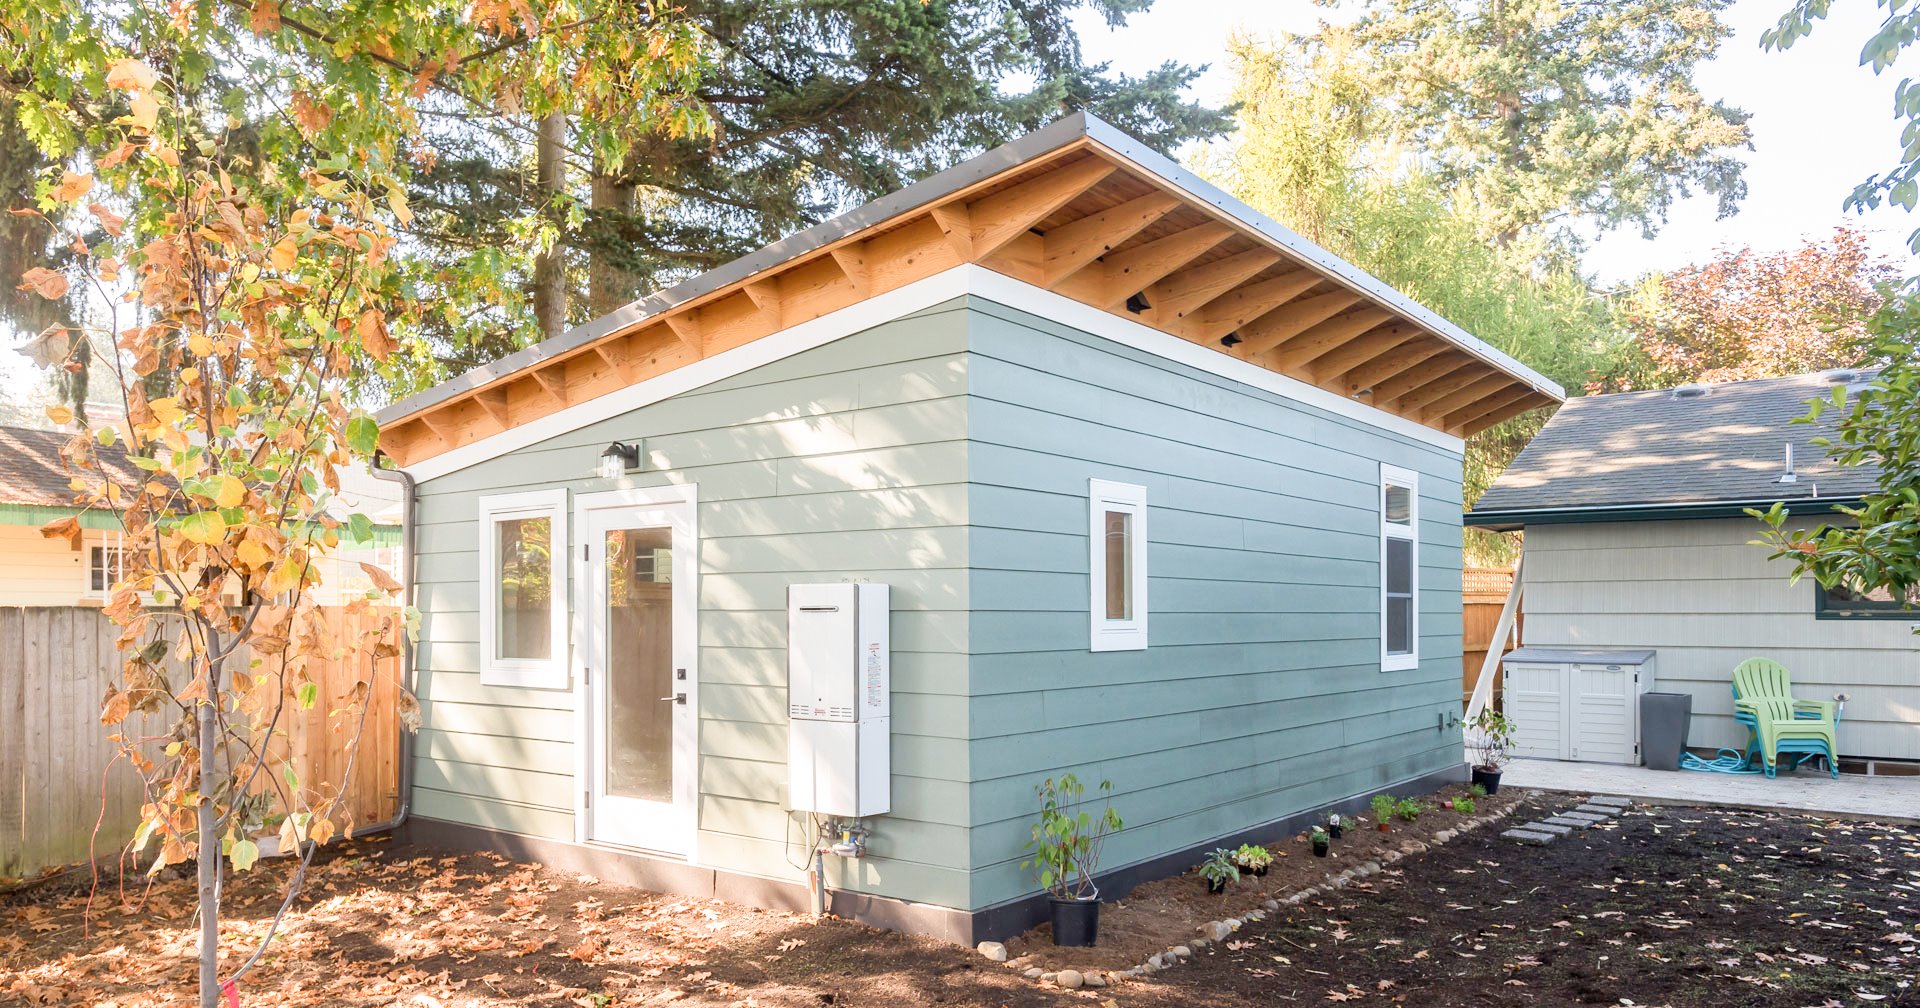 How Much Does An Accessory Dwelling Unit/Granny Flat Cost In Los Angeles